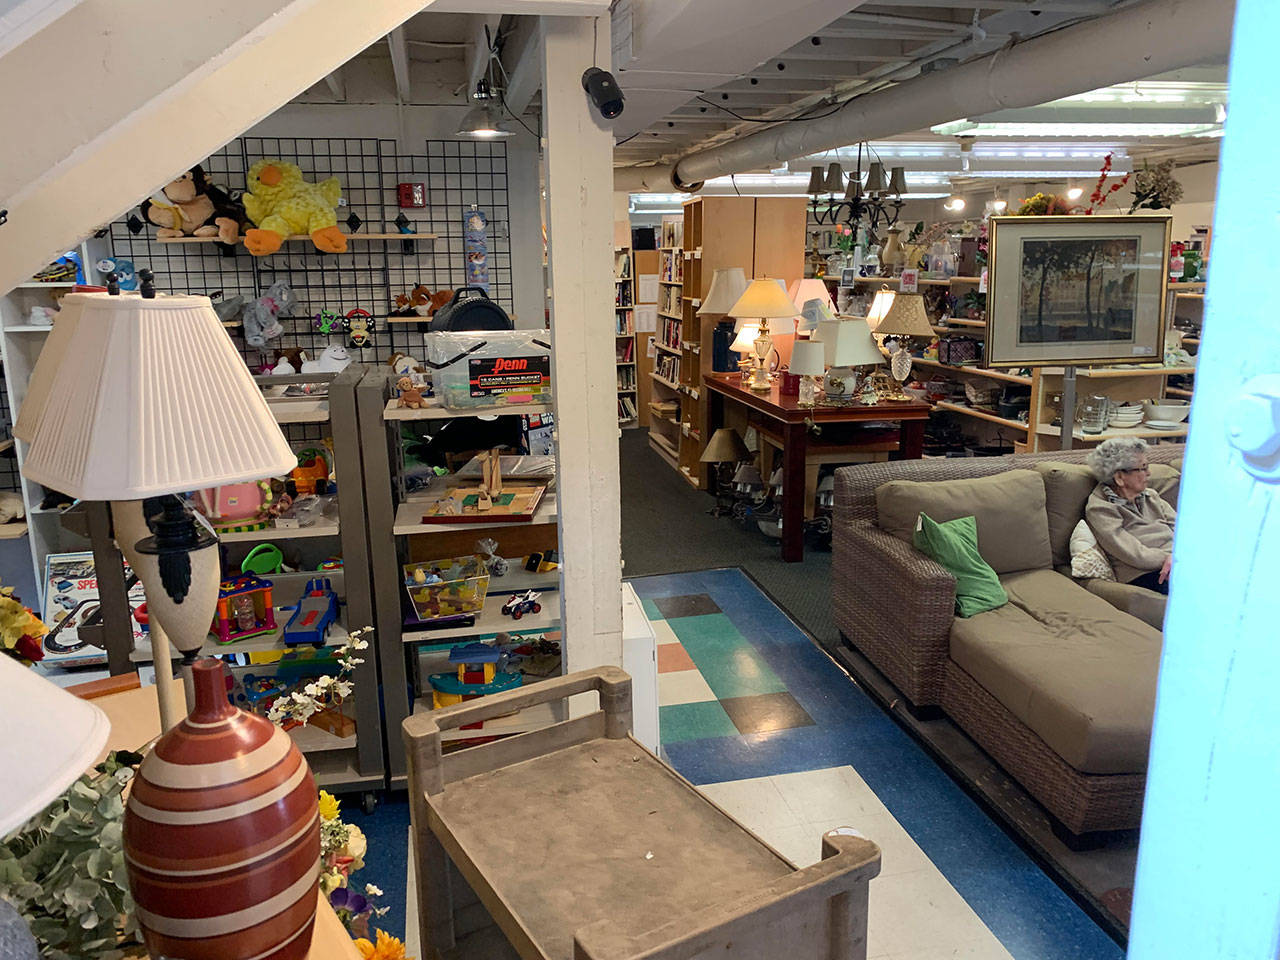 Objects for sale are displayed in sectioned areas throughout the store to make for organized shopping. Photo by Madeline Coats.